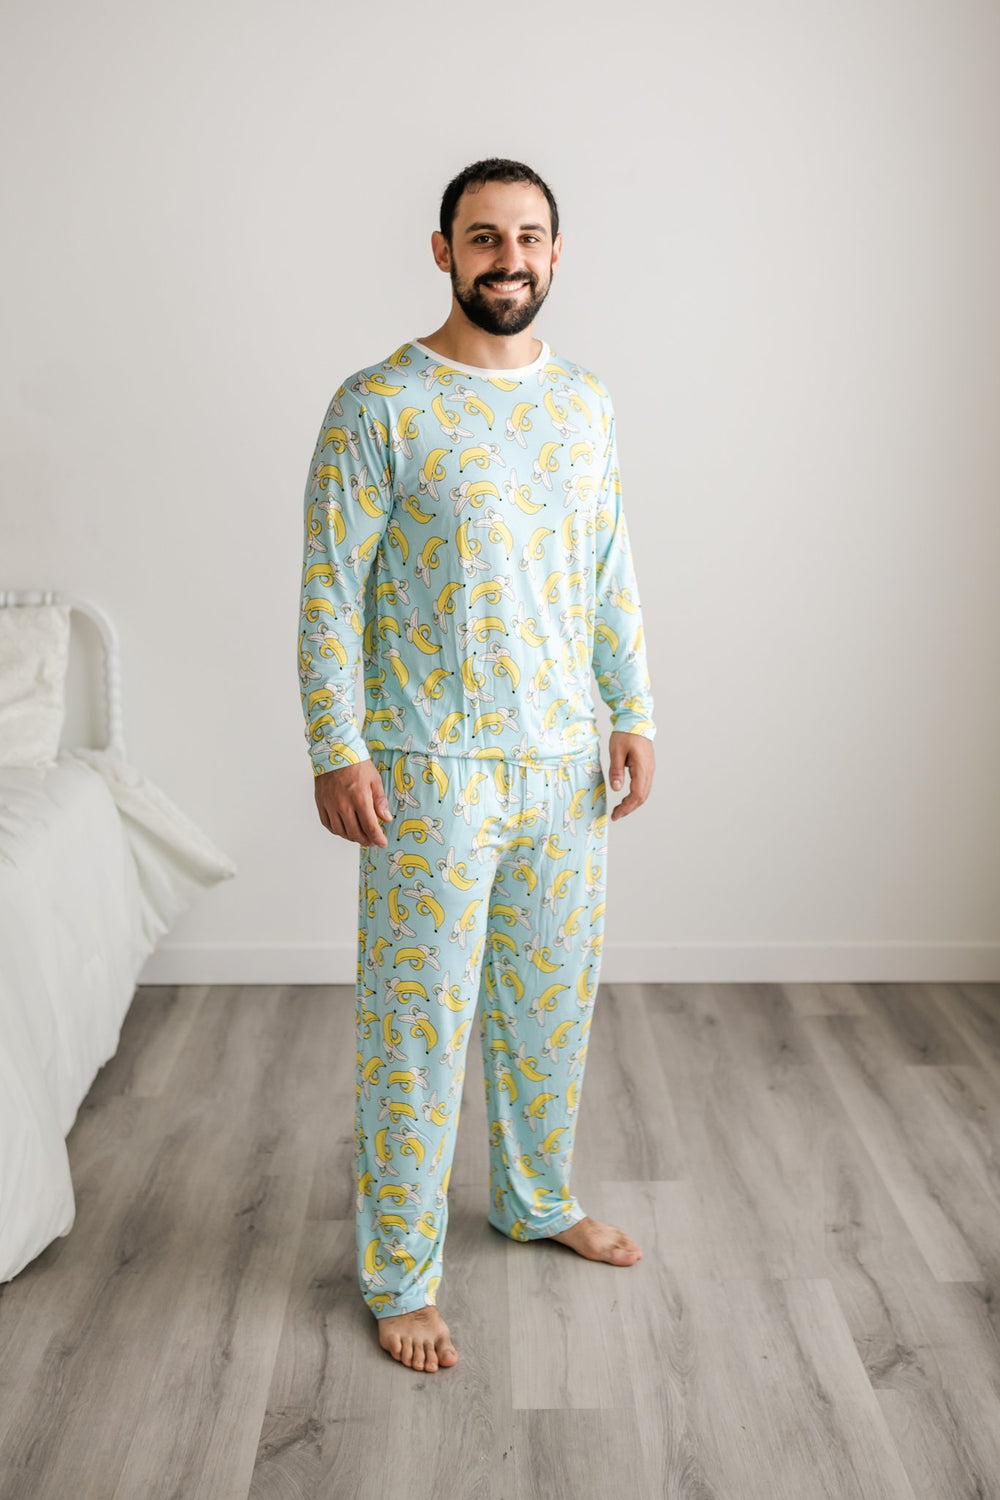 Click to see full screen - Male model wearing banana printed long sleeve pajama top with matching pajama pants. This print features a light blue background with pops of yellow coming from the bananas. The pajama top also features a white trim accent on the collar.